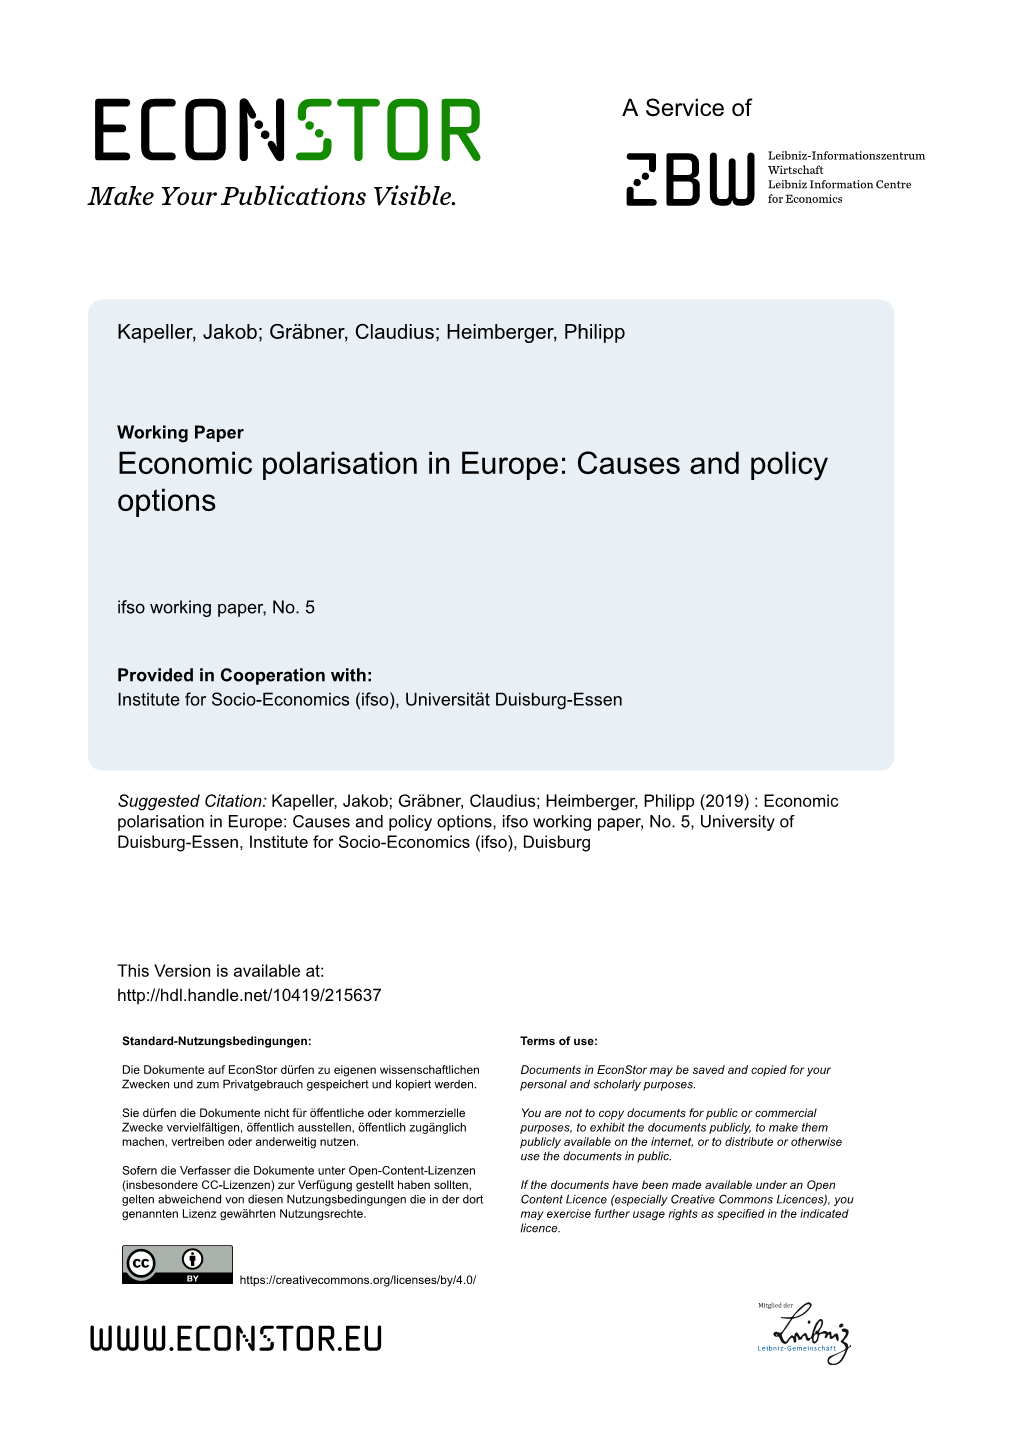 Economic Polarisation in Europe: Causes and Policy Options